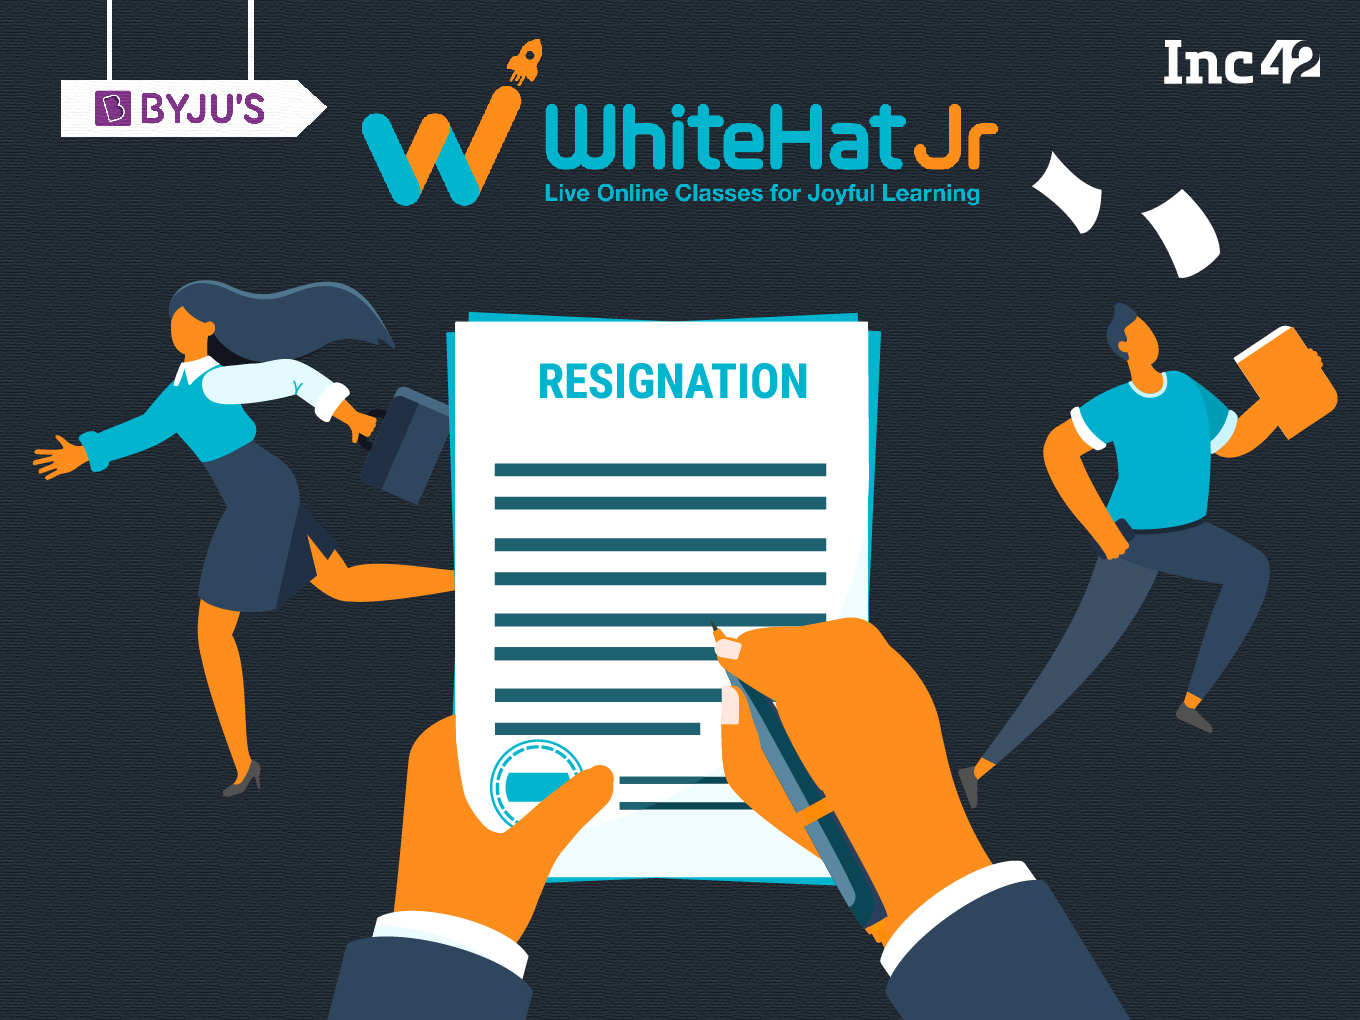 WhiteHat Jr CEO Ananya Tripathi Quits In Another High-Level Departure At BYJU’S